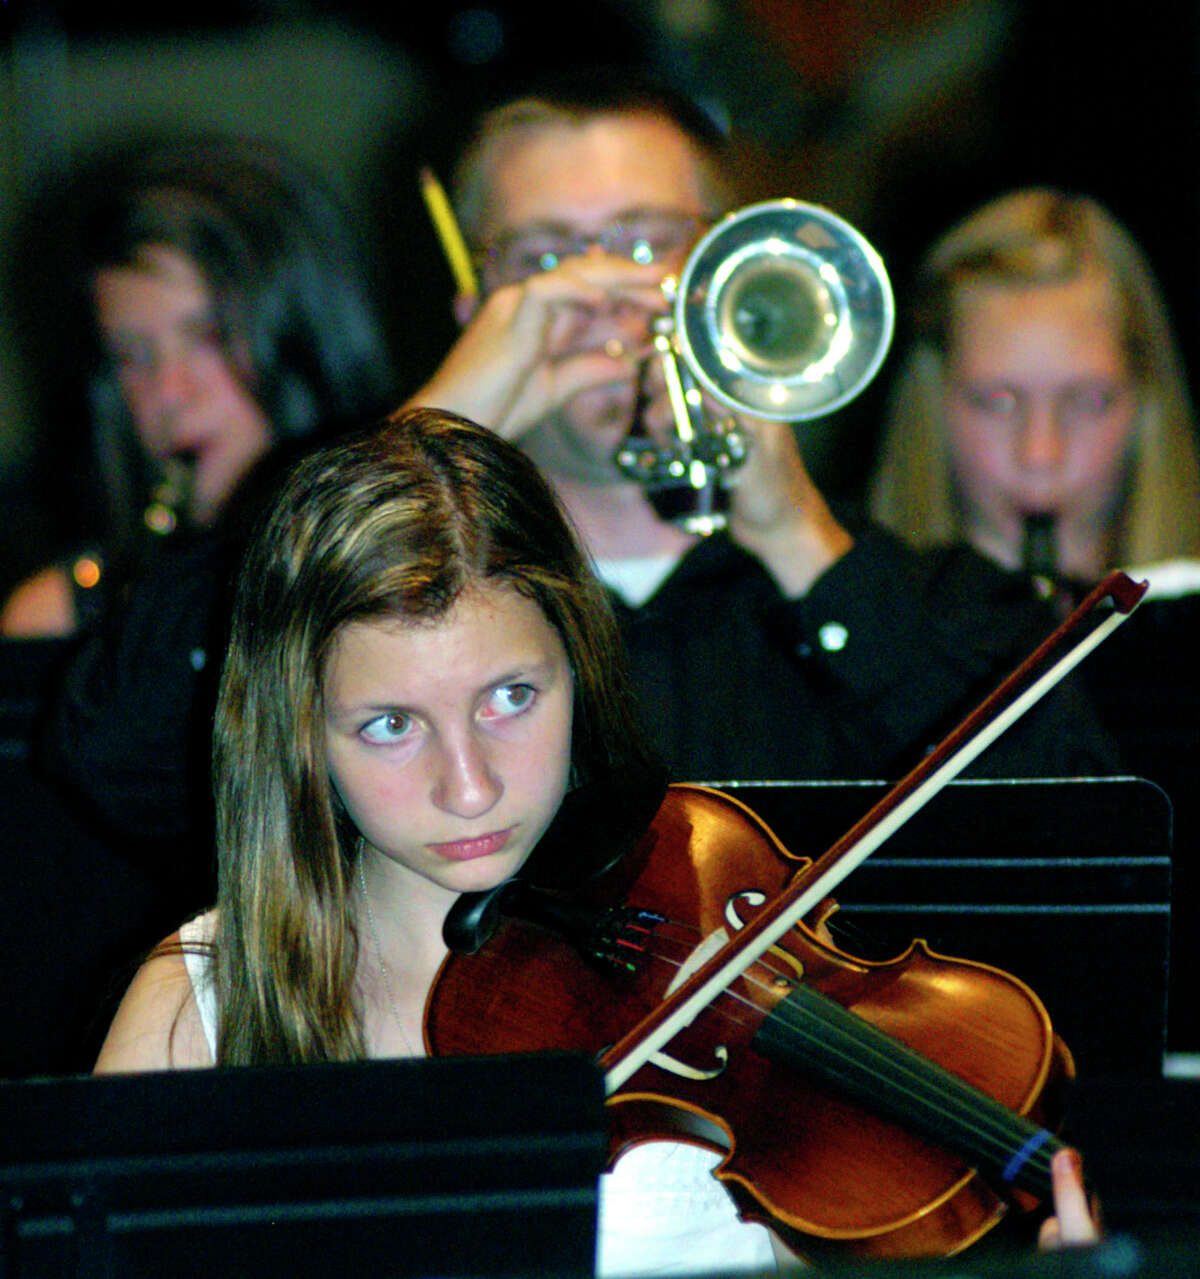 The school orchestra performs Bill Withers' "Lean on me" during the Shepaug Valley Middle School promotion ceremony, June 15, 2012